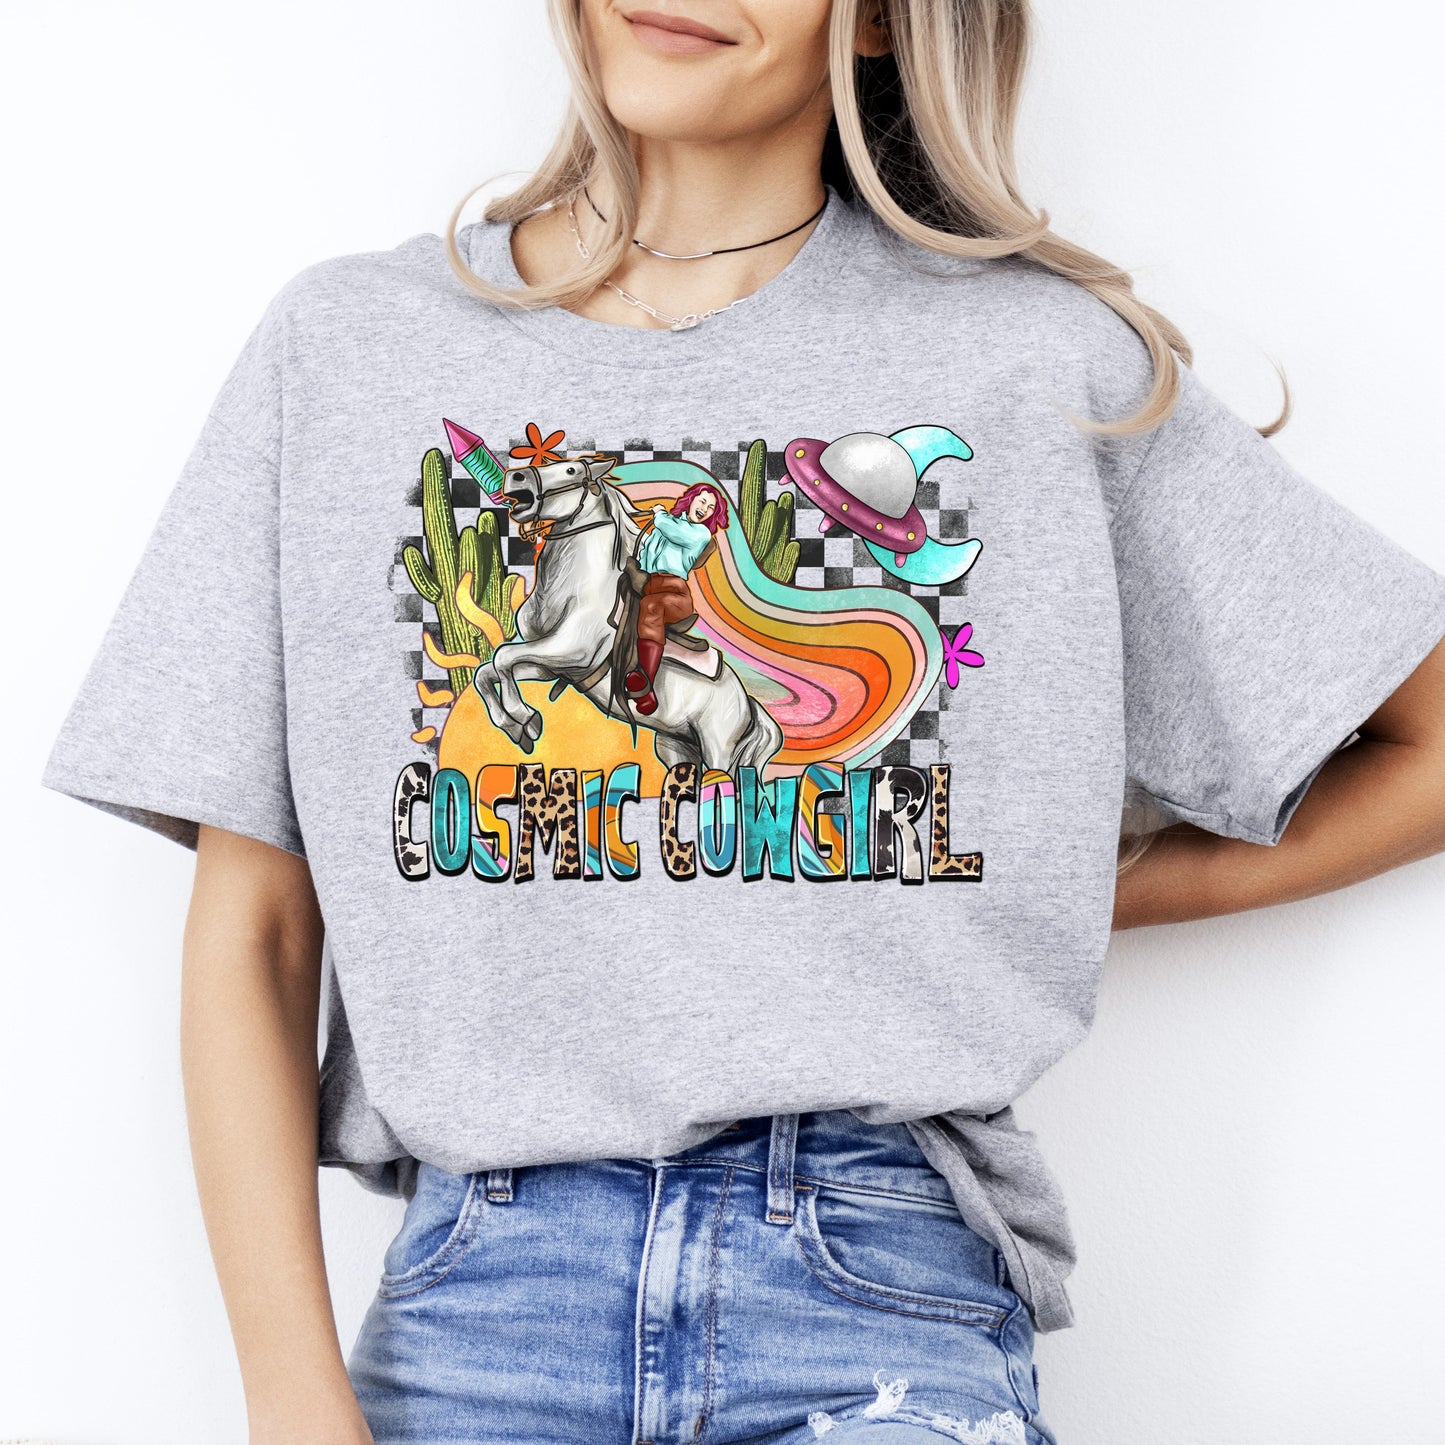 Cosmic cowgirl T-Shirt Alien Texas Western horse cowgirl Unisex tee White Sand Sport Grey-Sport Grey-Family-Gift-Planet